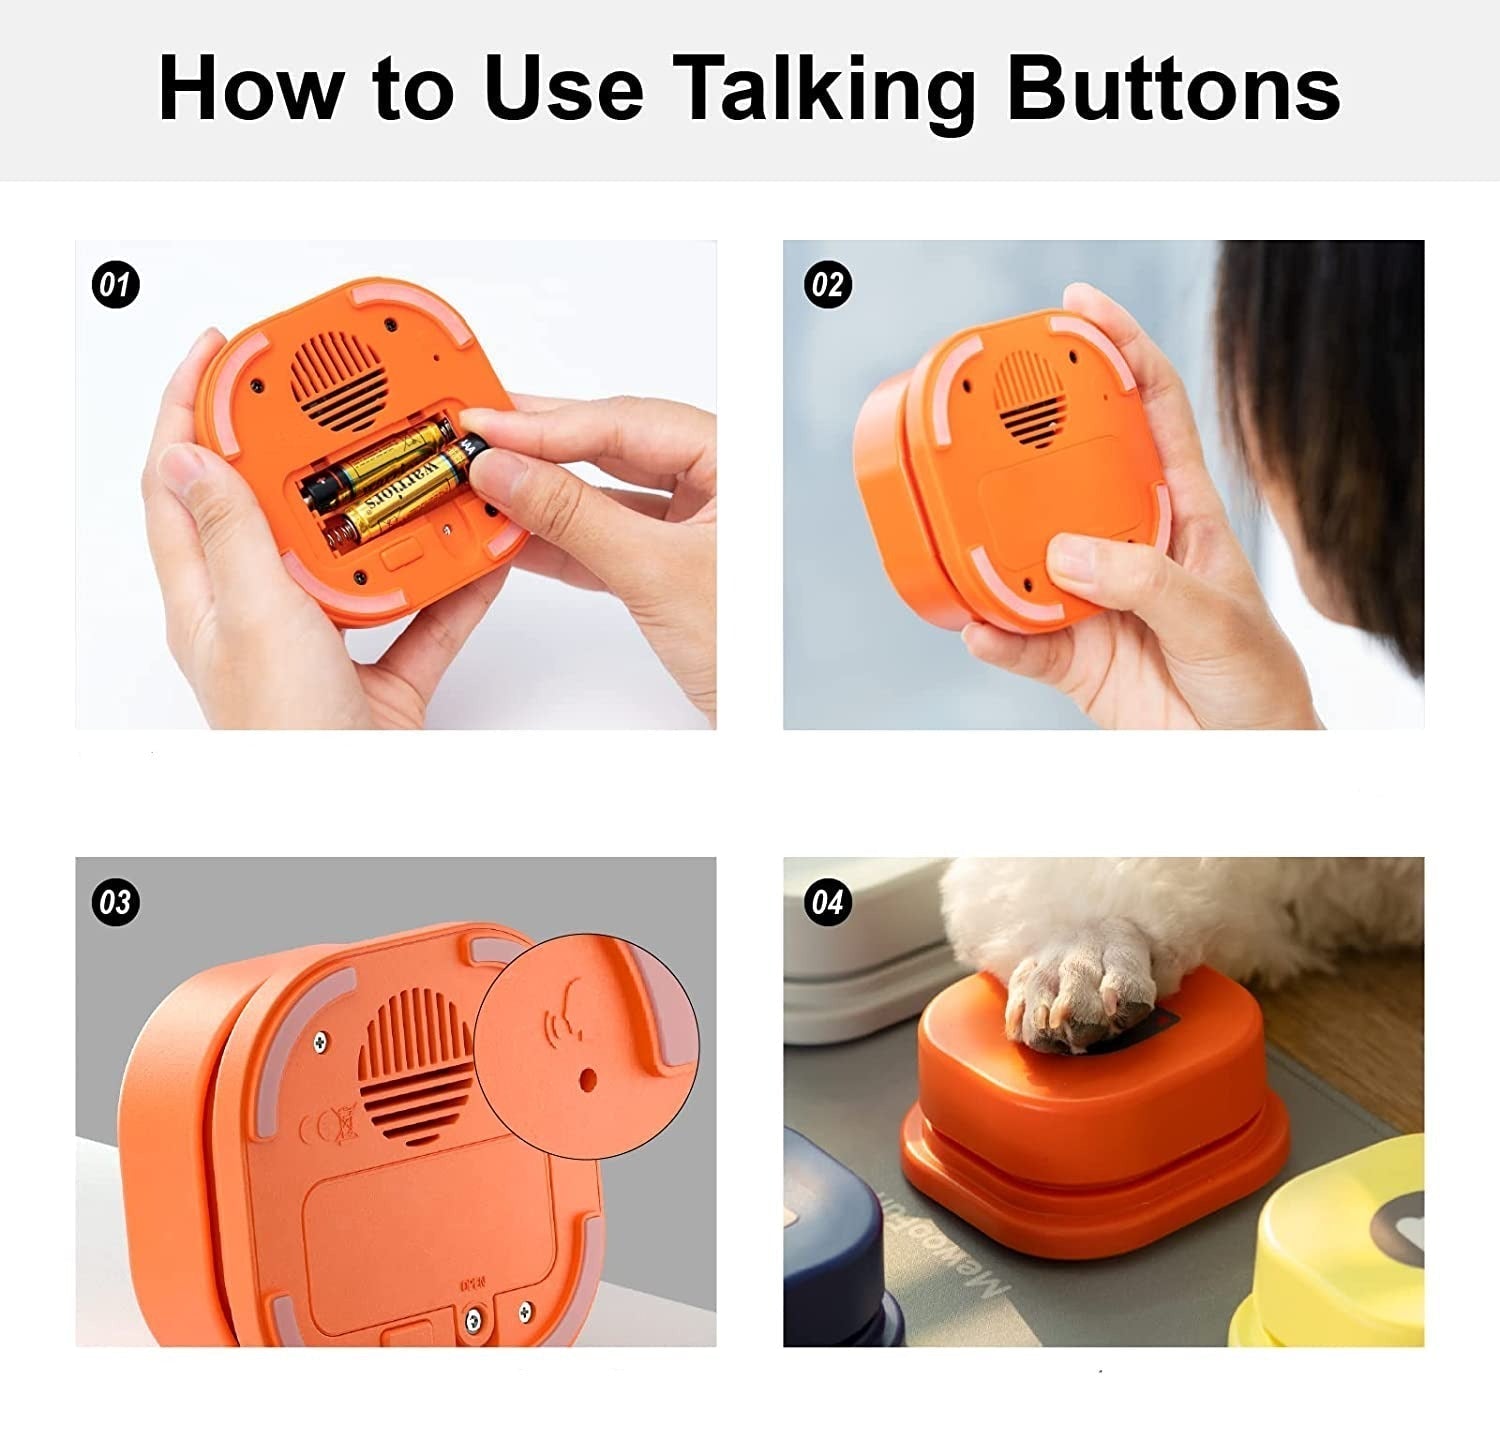 Pet Interactive Training Buttons